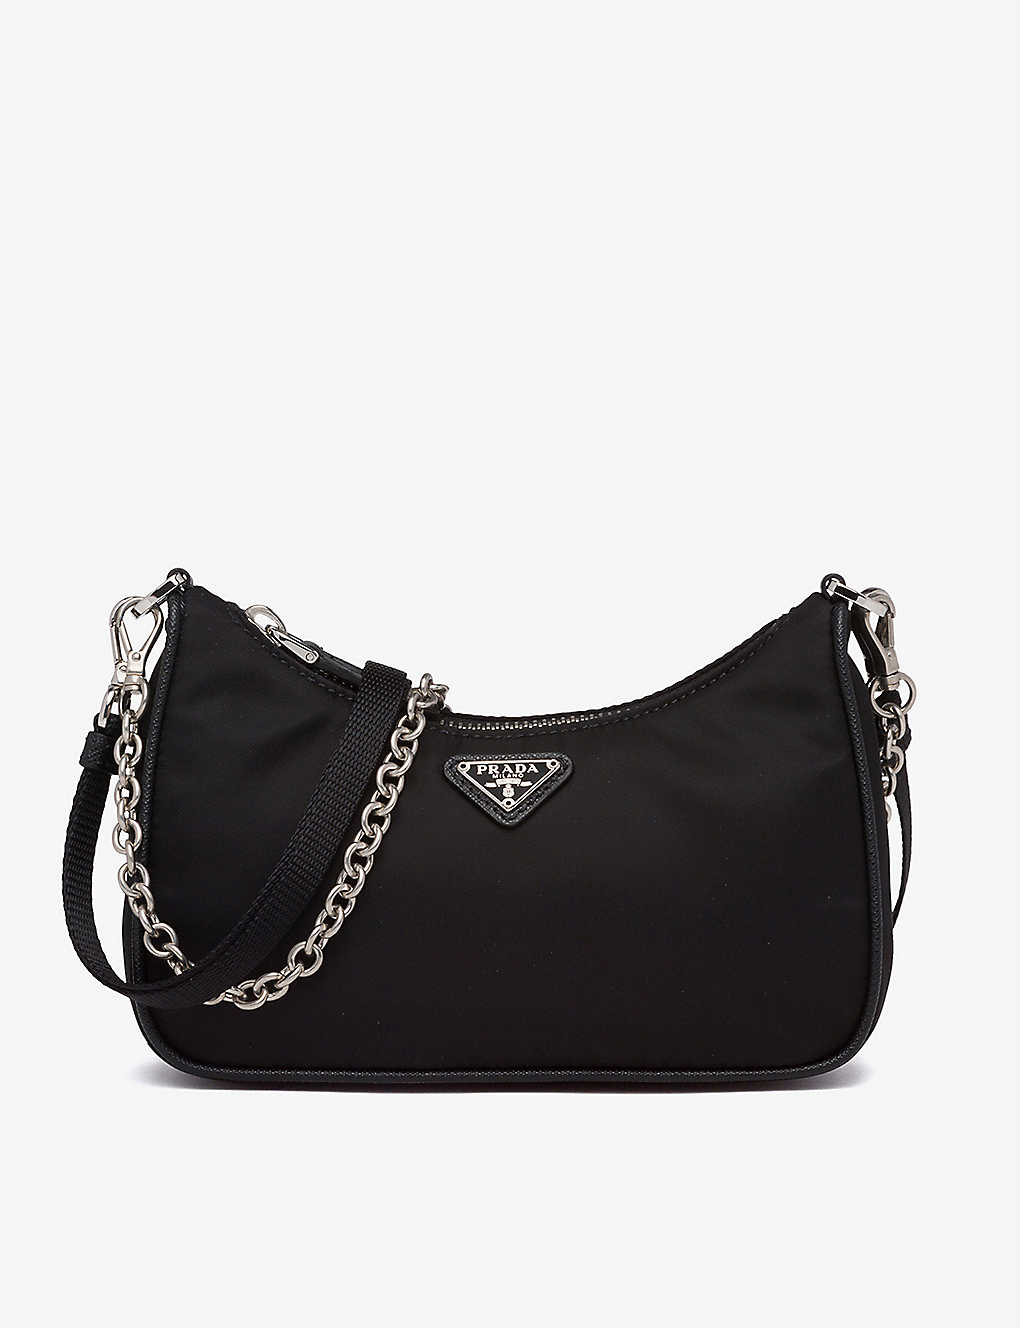 PRADA: Chain-embellished leather and recycled-nylon shoulder bag